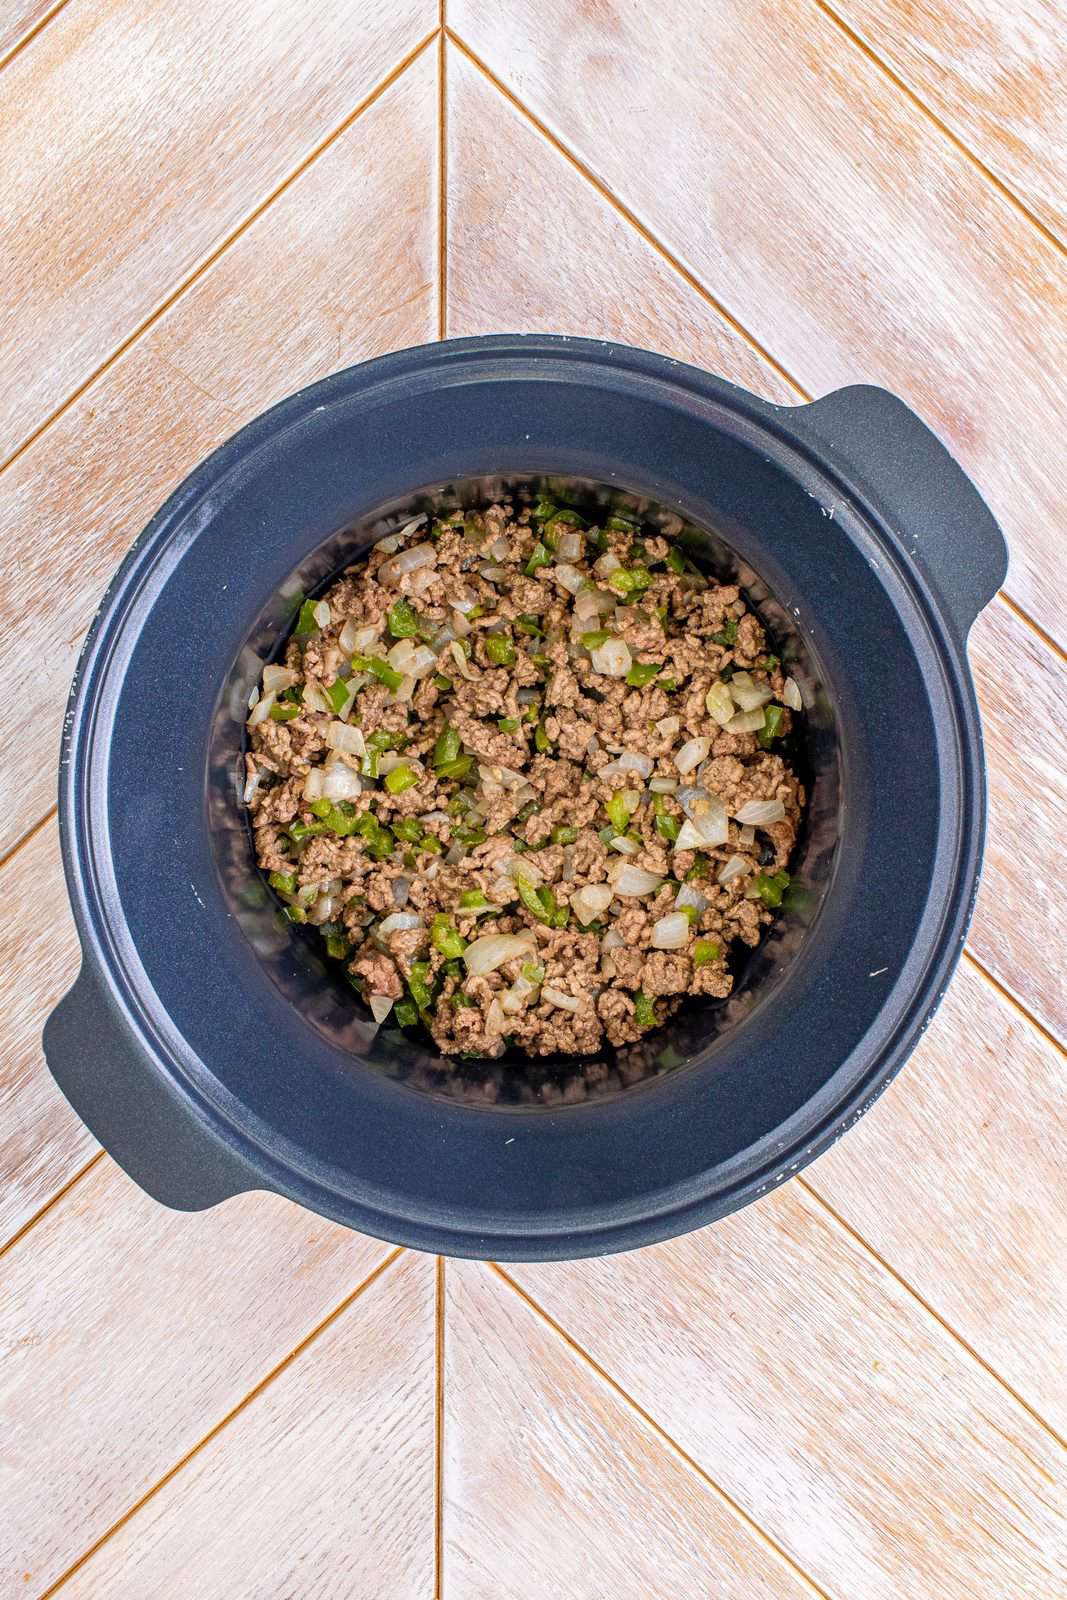 Ground beef mixture added to bottom of crock pot.